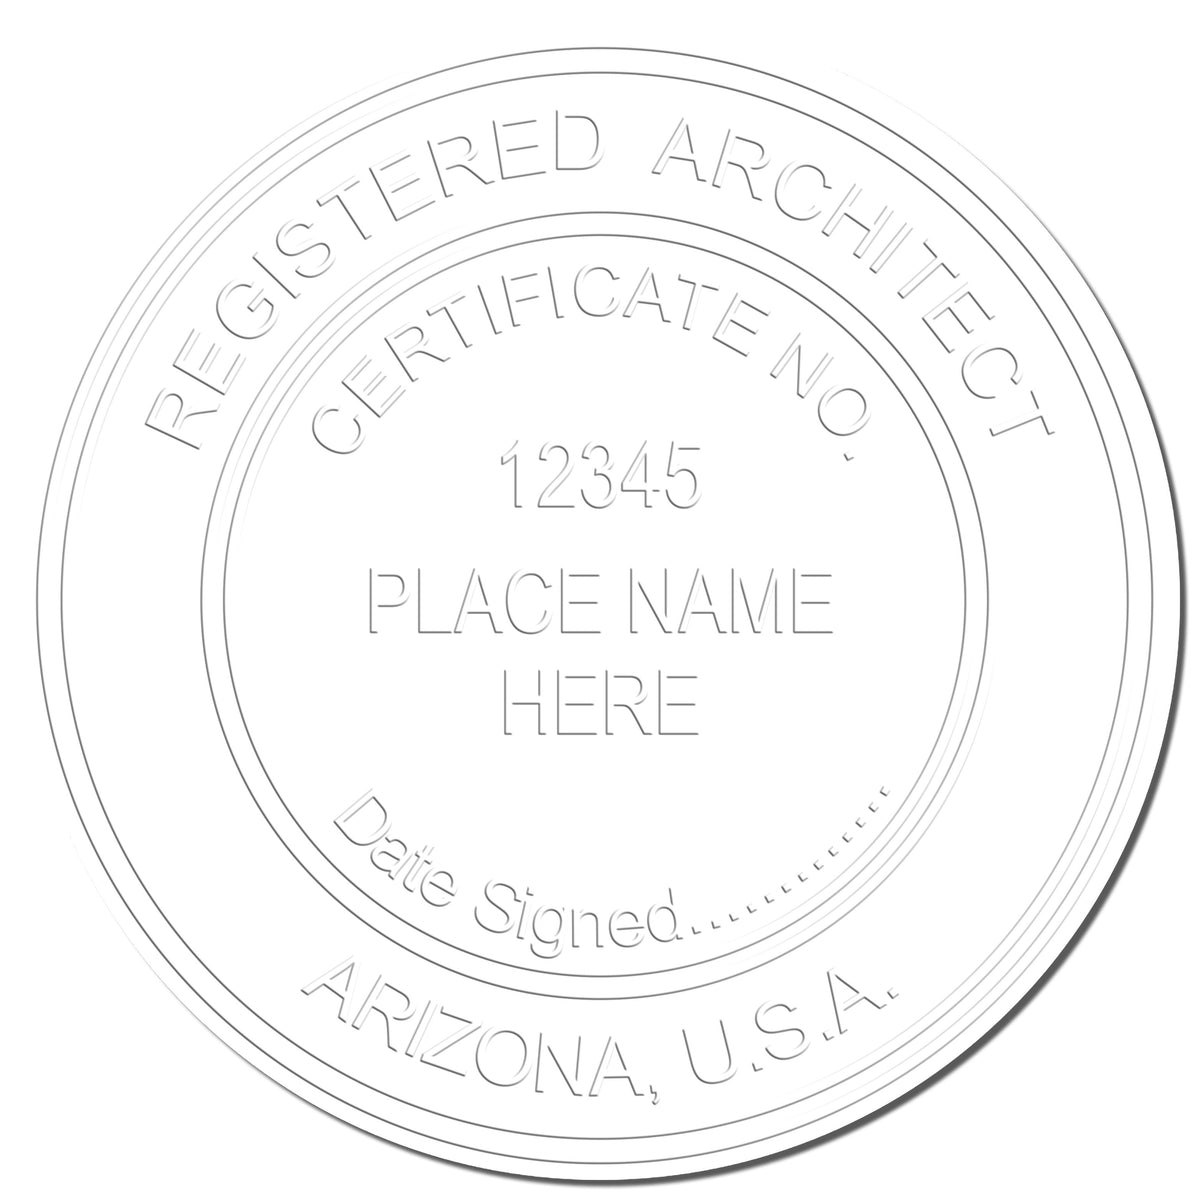 A photograph of the Handheld Arizona Architect Seal Embosser stamp impression reveals a vivid, professional image of the on paper.